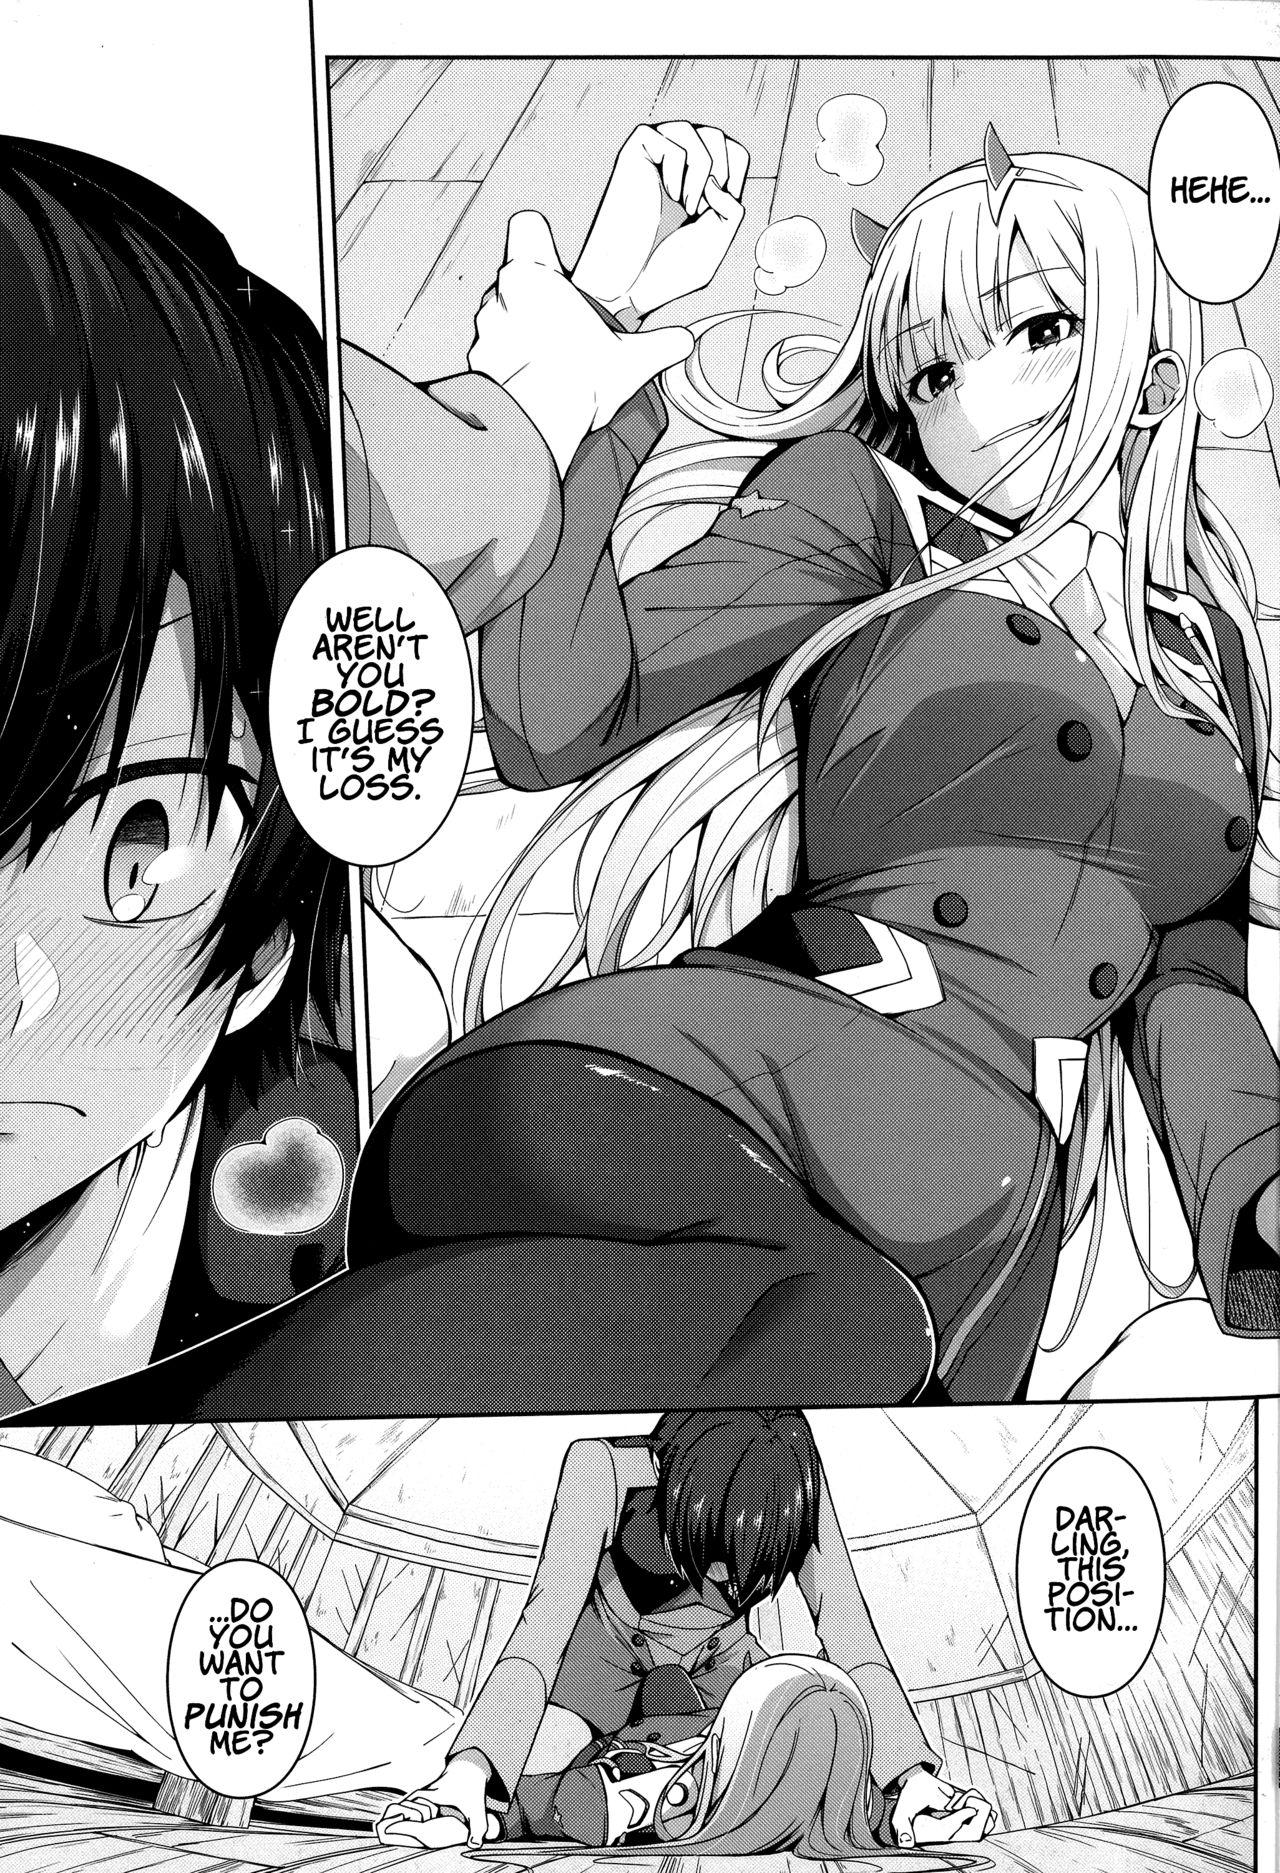 Chubby Forbidden Connection - Darling in the franxx Sex - Page 4